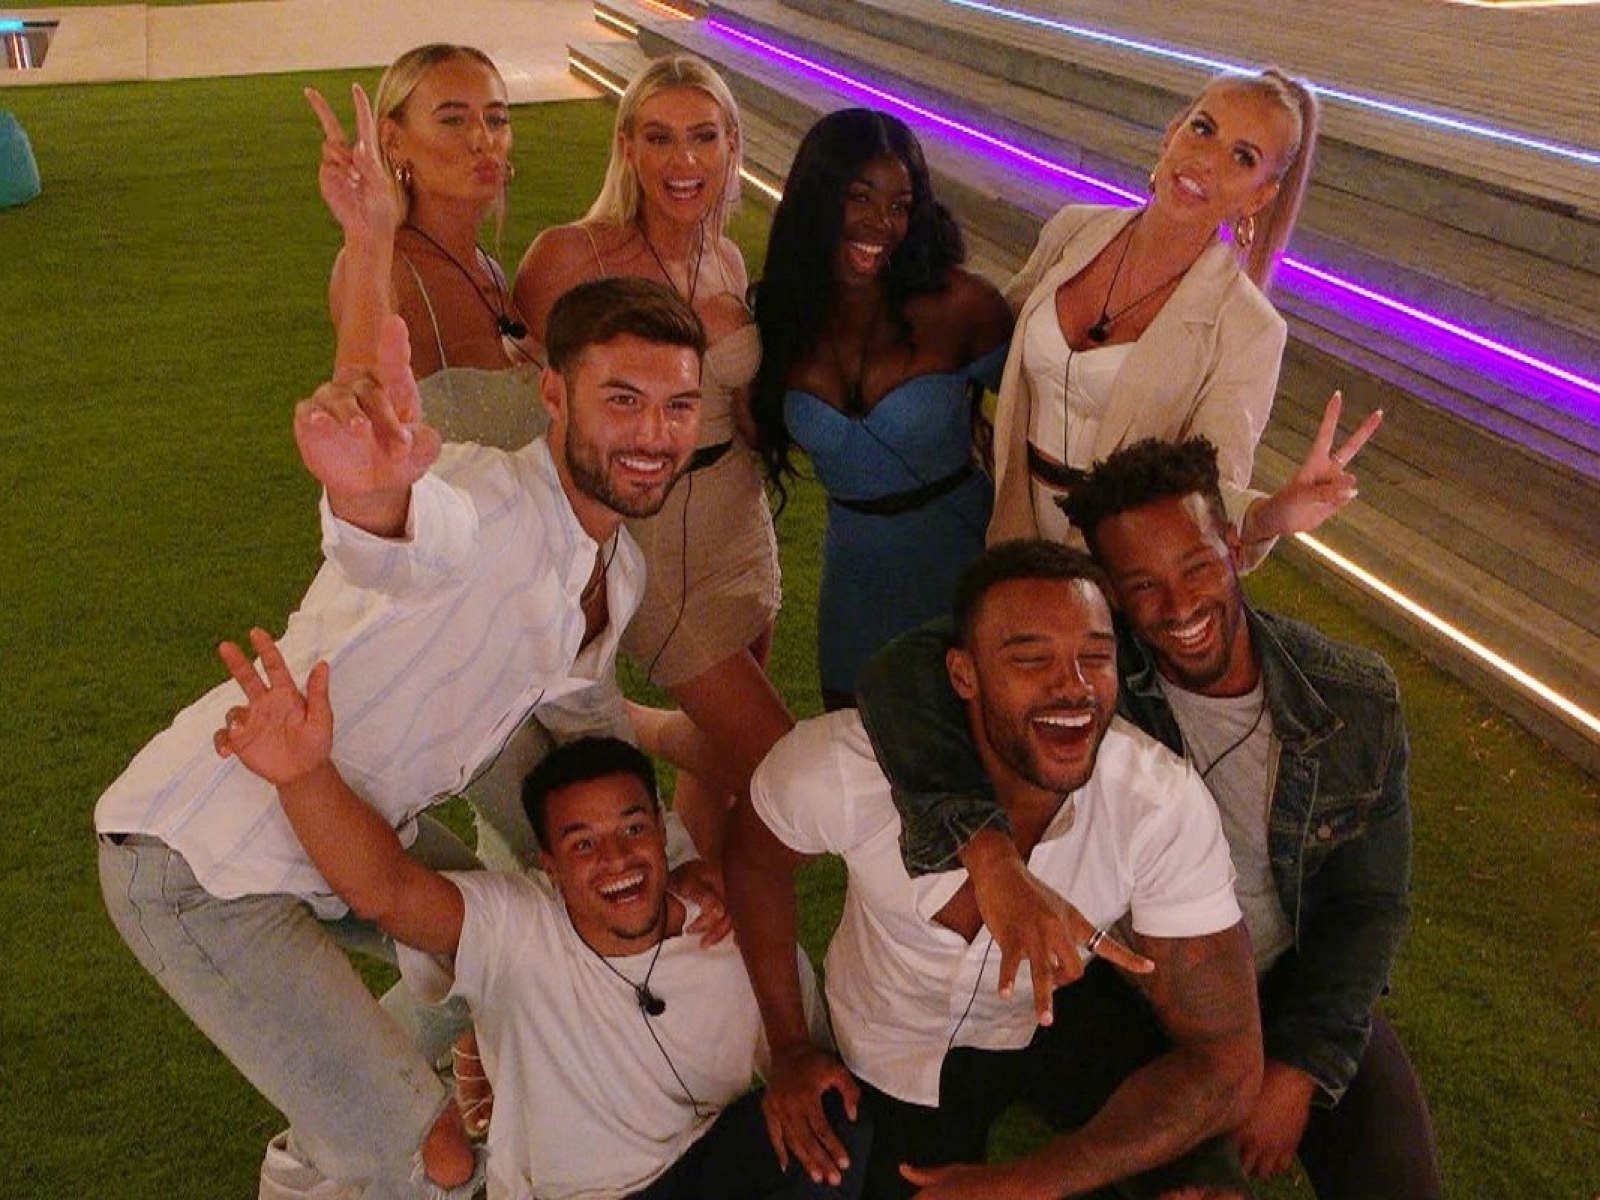 The Best Thing About #LoveIsland